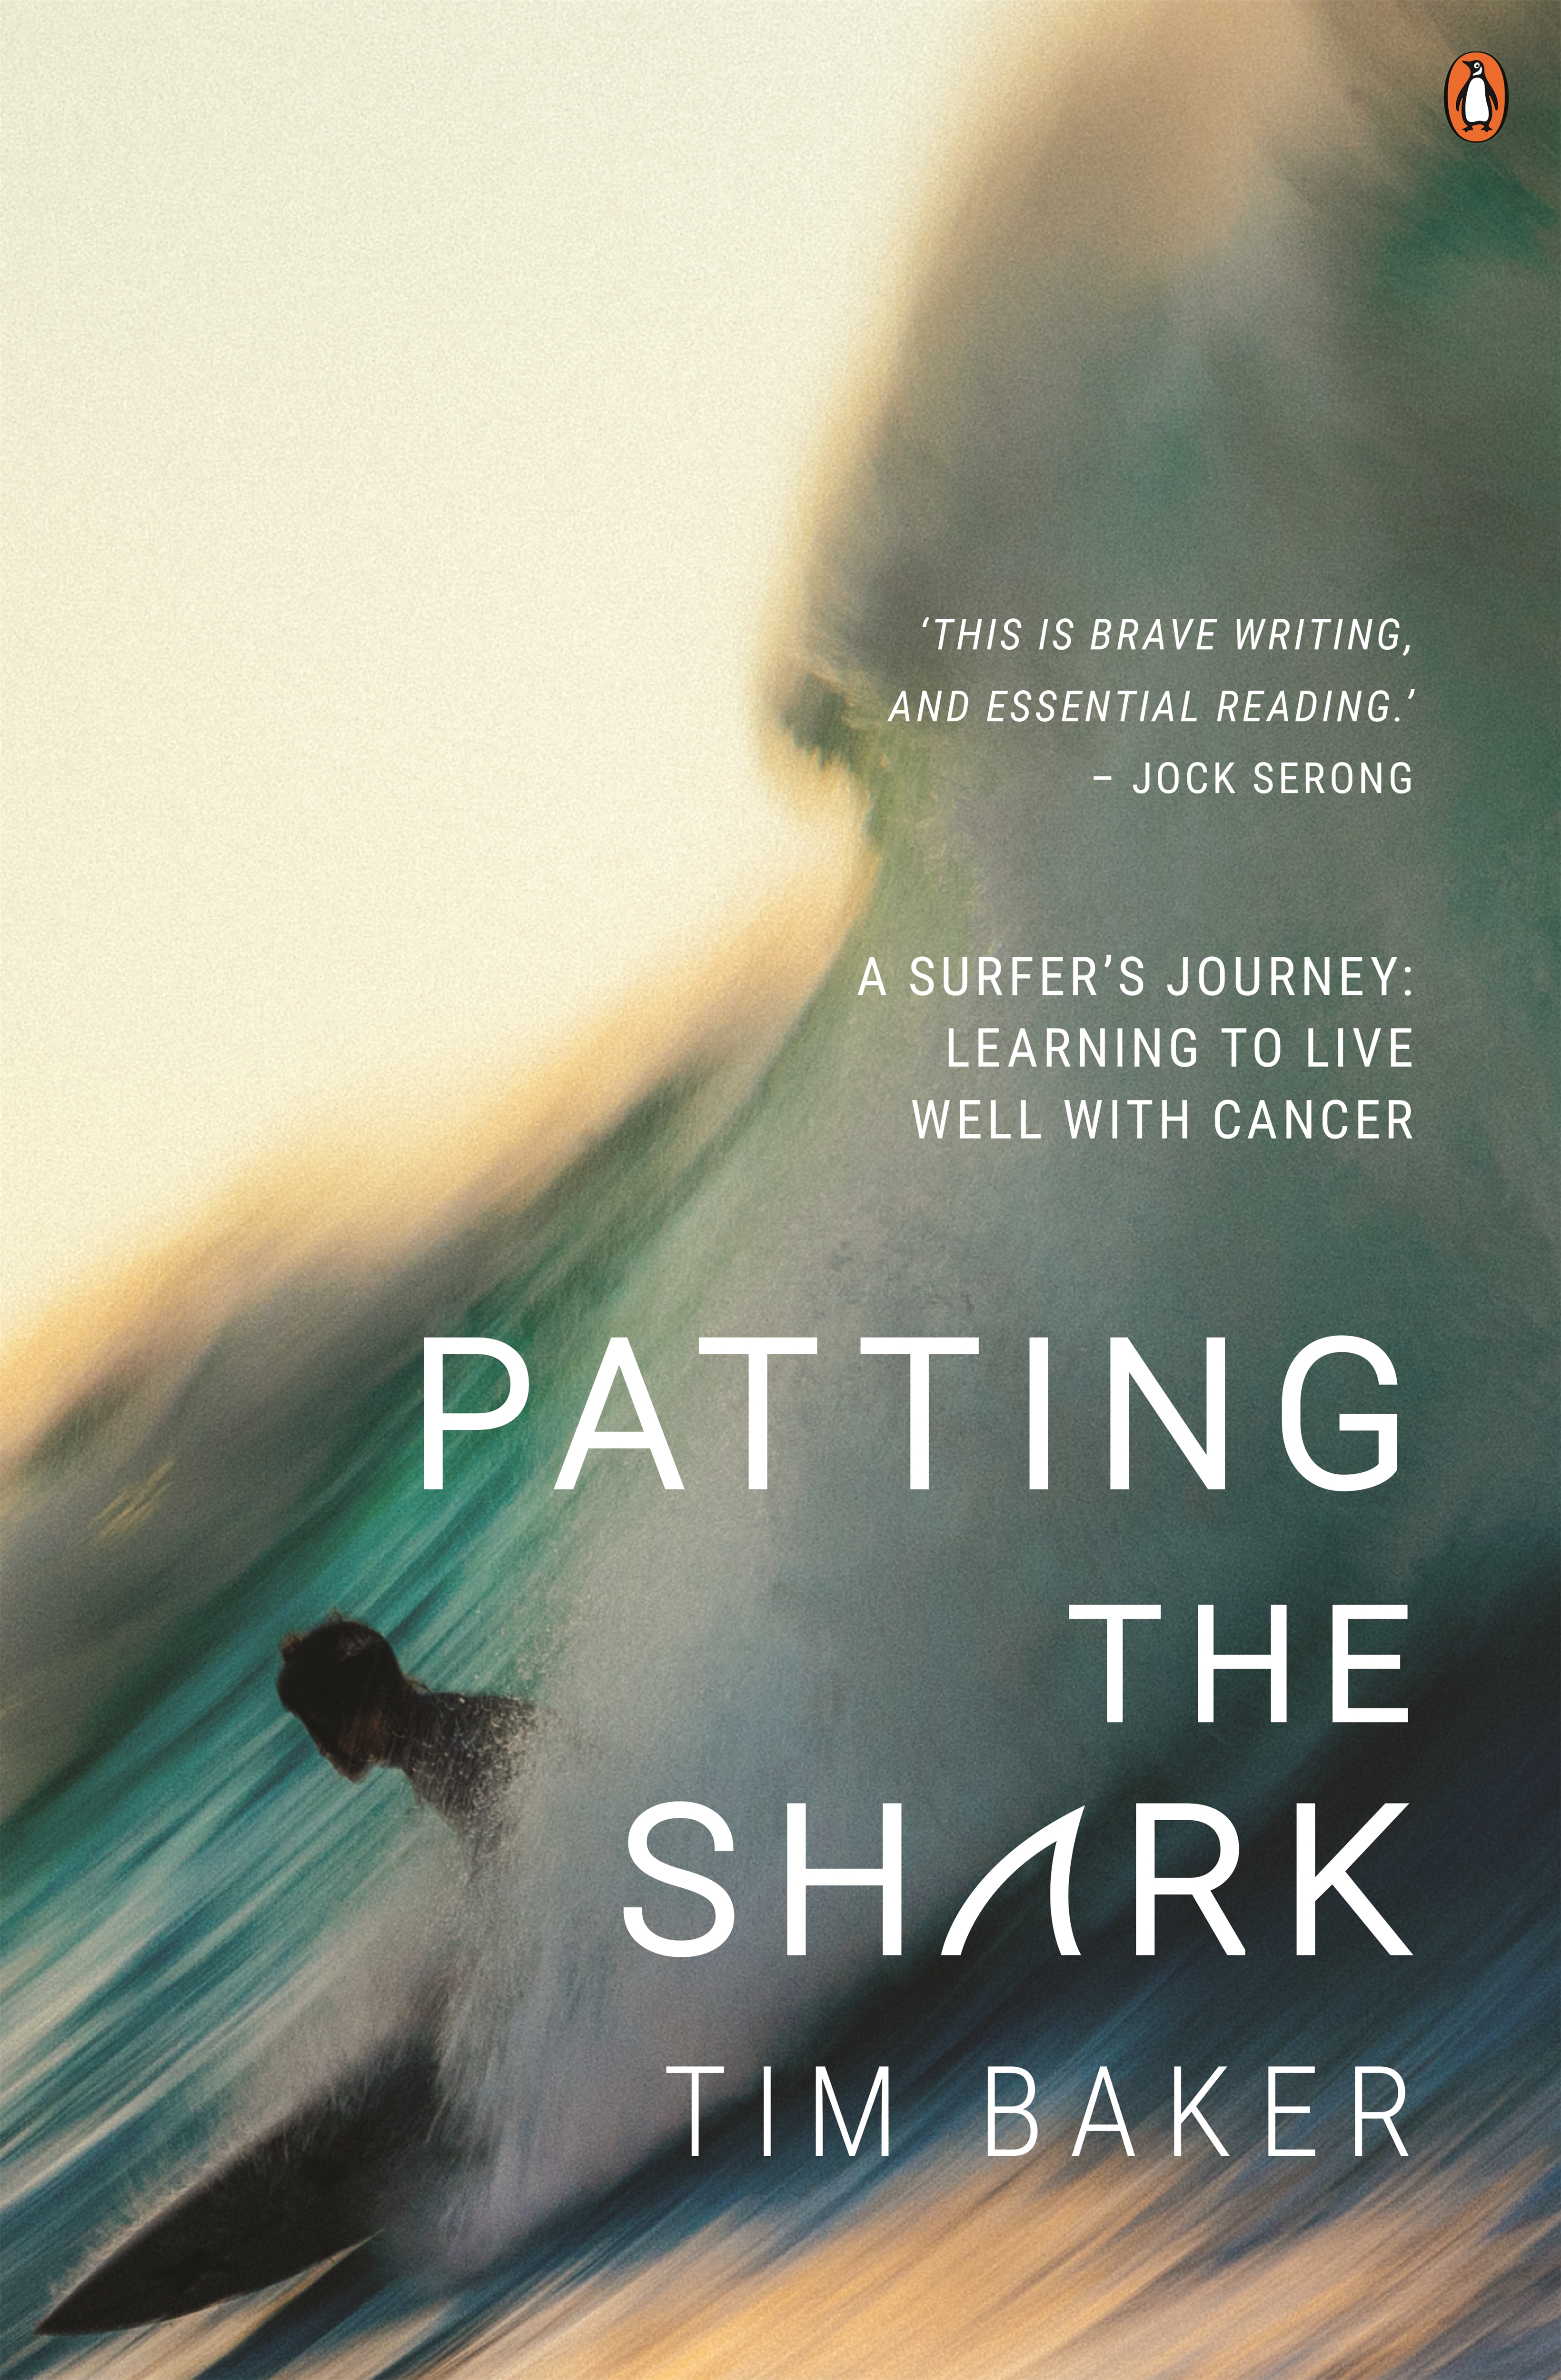 The cover of Patting the Shark by Tim Baker, featuring a surfer riding a wave